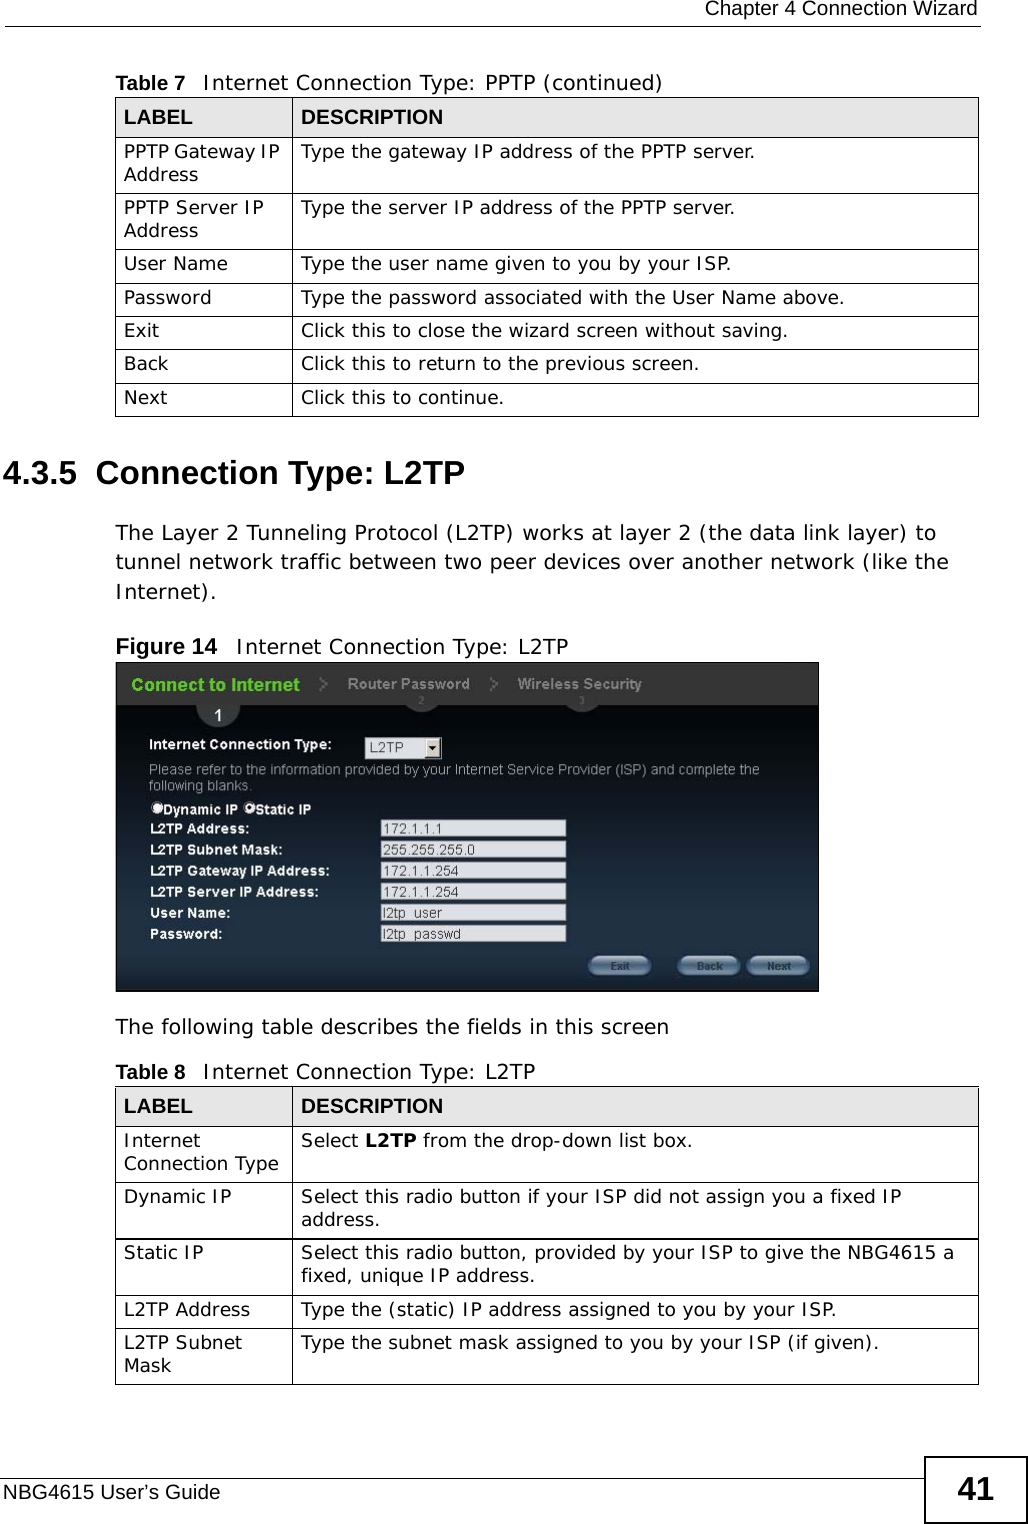  Chapter 4 Connection WizardNBG4615 User’s Guide 414.3.5  Connection Type: L2TPThe Layer 2 Tunneling Protocol (L2TP) works at layer 2 (the data link layer) to tunnel network traffic between two peer devices over another network (like the Internet).Figure 14   Internet Connection Type: L2TP The following table describes the fields in this screenPPTP Gateway IP Address Type the gateway IP address of the PPTP server.PPTP Server IP Address Type the server IP address of the PPTP server.User Name Type the user name given to you by your ISP. Password Type the password associated with the User Name above.Exit Click this to close the wizard screen without saving.Back Click this to return to the previous screen.Next Click this to continue. Table 7   Internet Connection Type: PPTP (continued)LABEL DESCRIPTIONTable 8   Internet Connection Type: L2TPLABEL DESCRIPTIONInternet Connection Type Select L2TP from the drop-down list box. Dynamic IP Select this radio button if your ISP did not assign you a fixed IP address.Static IP Select this radio button, provided by your ISP to give the NBG4615 a fixed, unique IP address.L2TP Address Type the (static) IP address assigned to you by your ISP.L2TP Subnet Mask Type the subnet mask assigned to you by your ISP (if given).